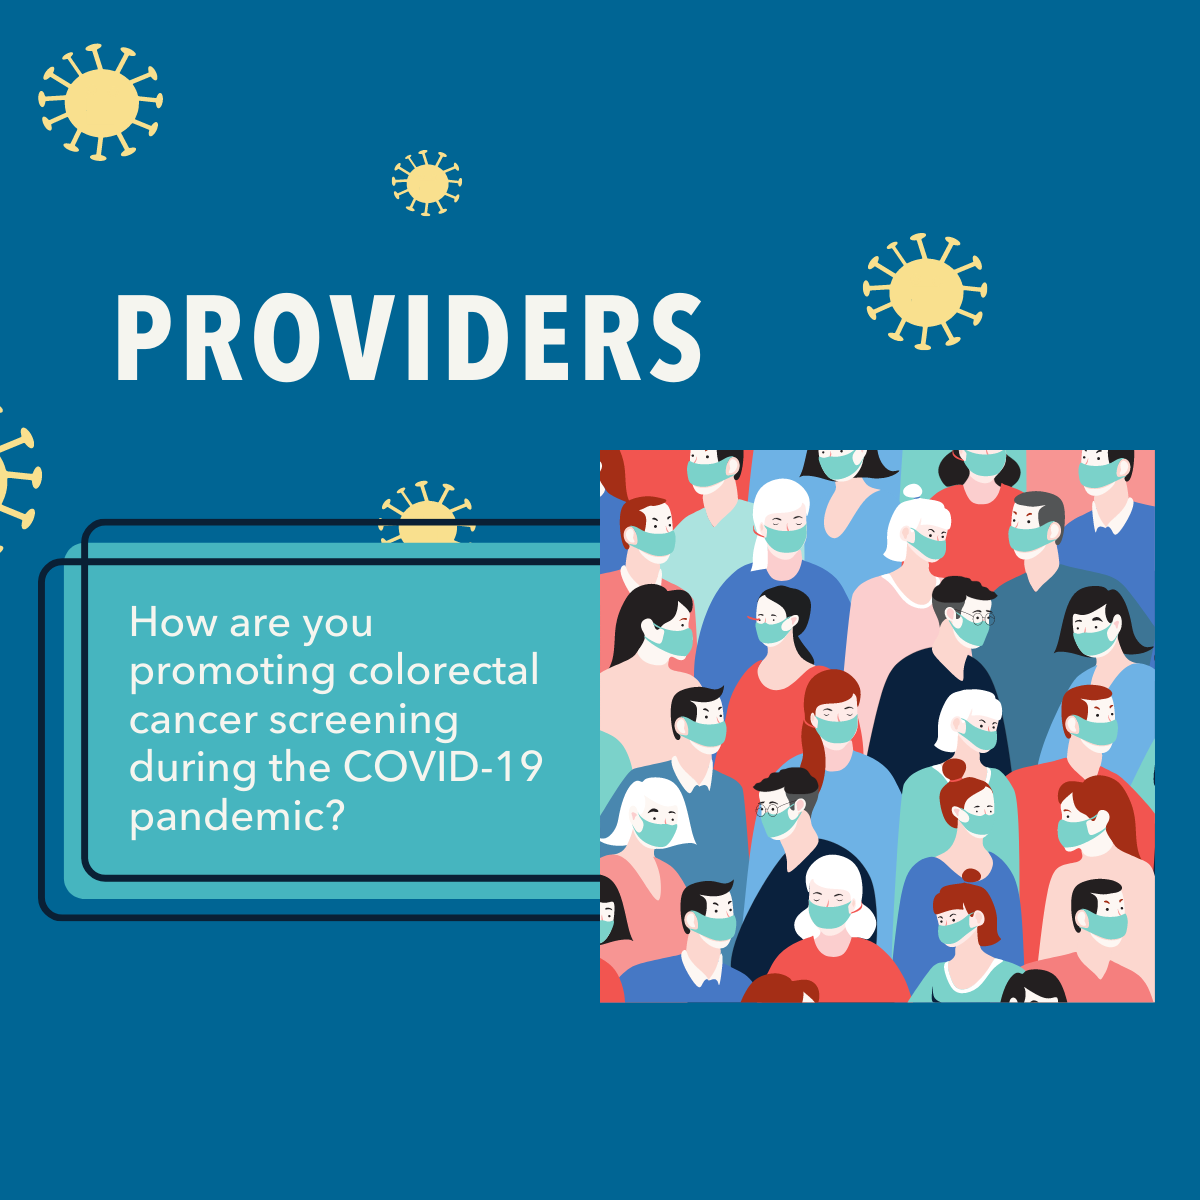 Image of crowd of people wearing masks. Text box next to image reads: providers, how are you promoting colorectal cancer screening during the COVID-19 pandemic?